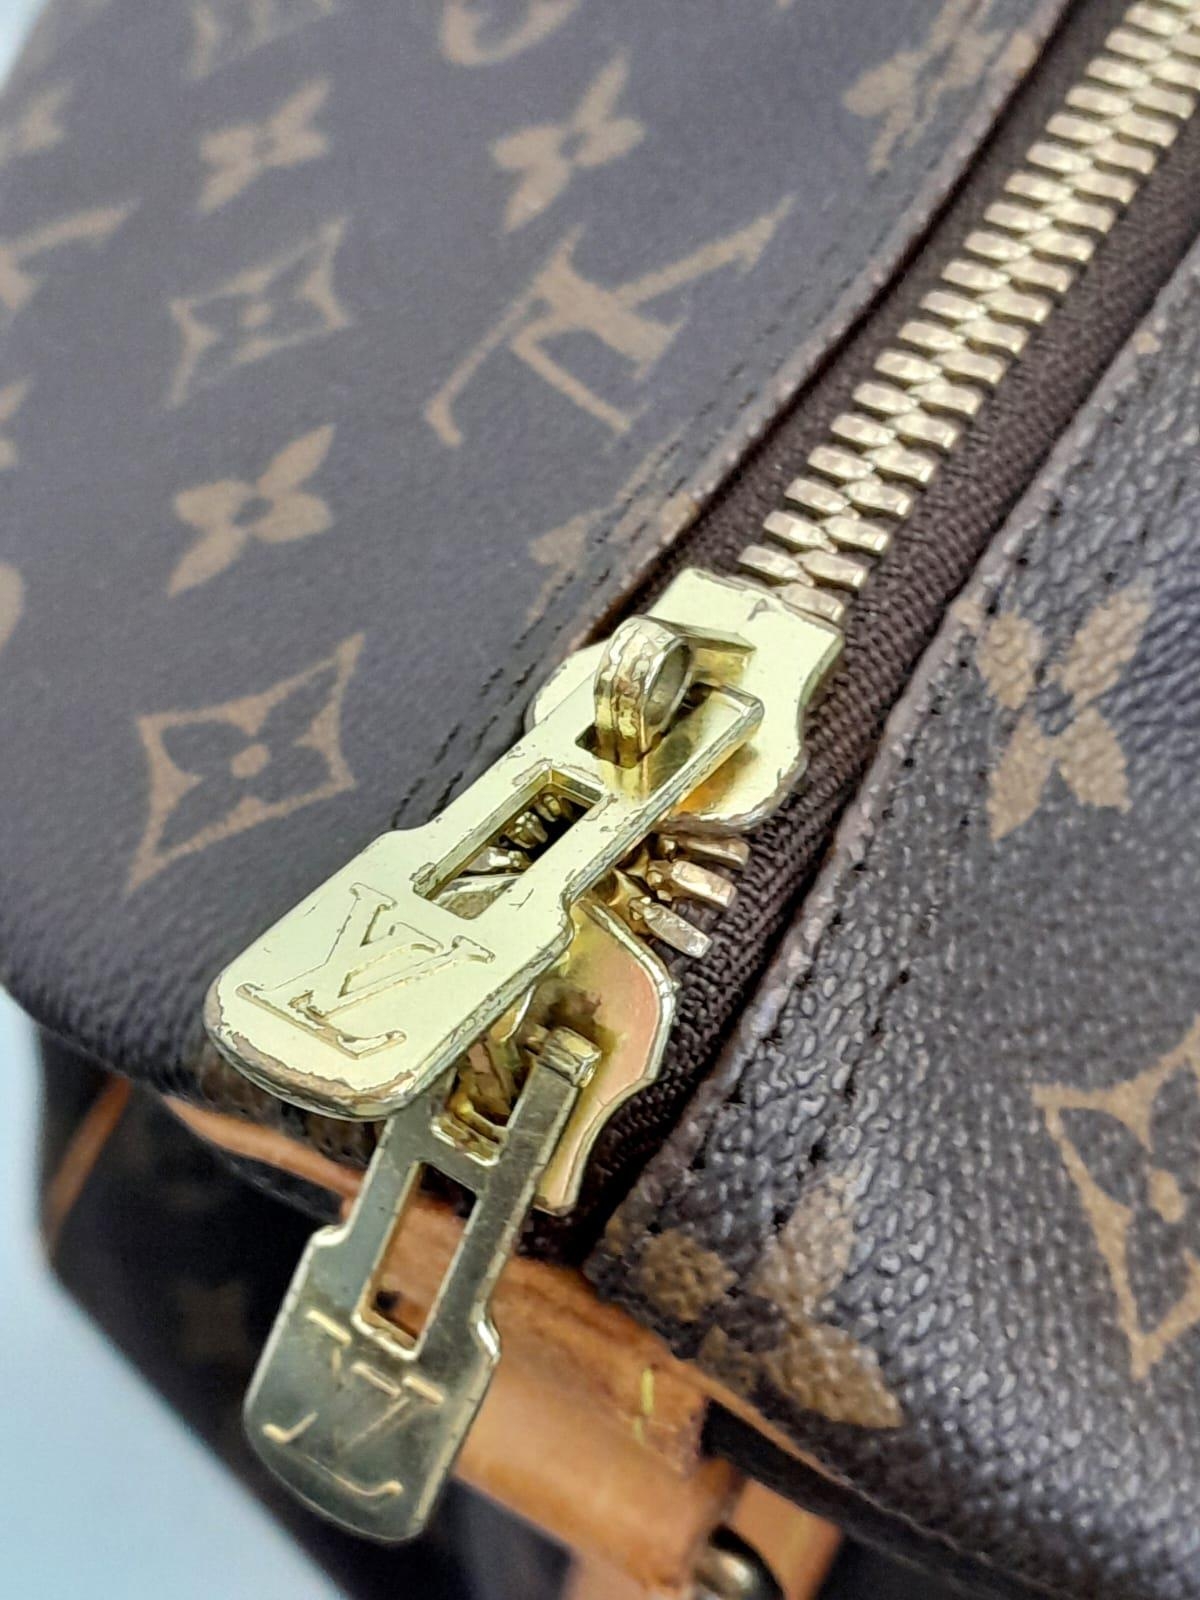 A Large Louis Vuitton Keepall Travel Bag. Monogram LV canvas exterior with cowhide leather handles - Image 5 of 8